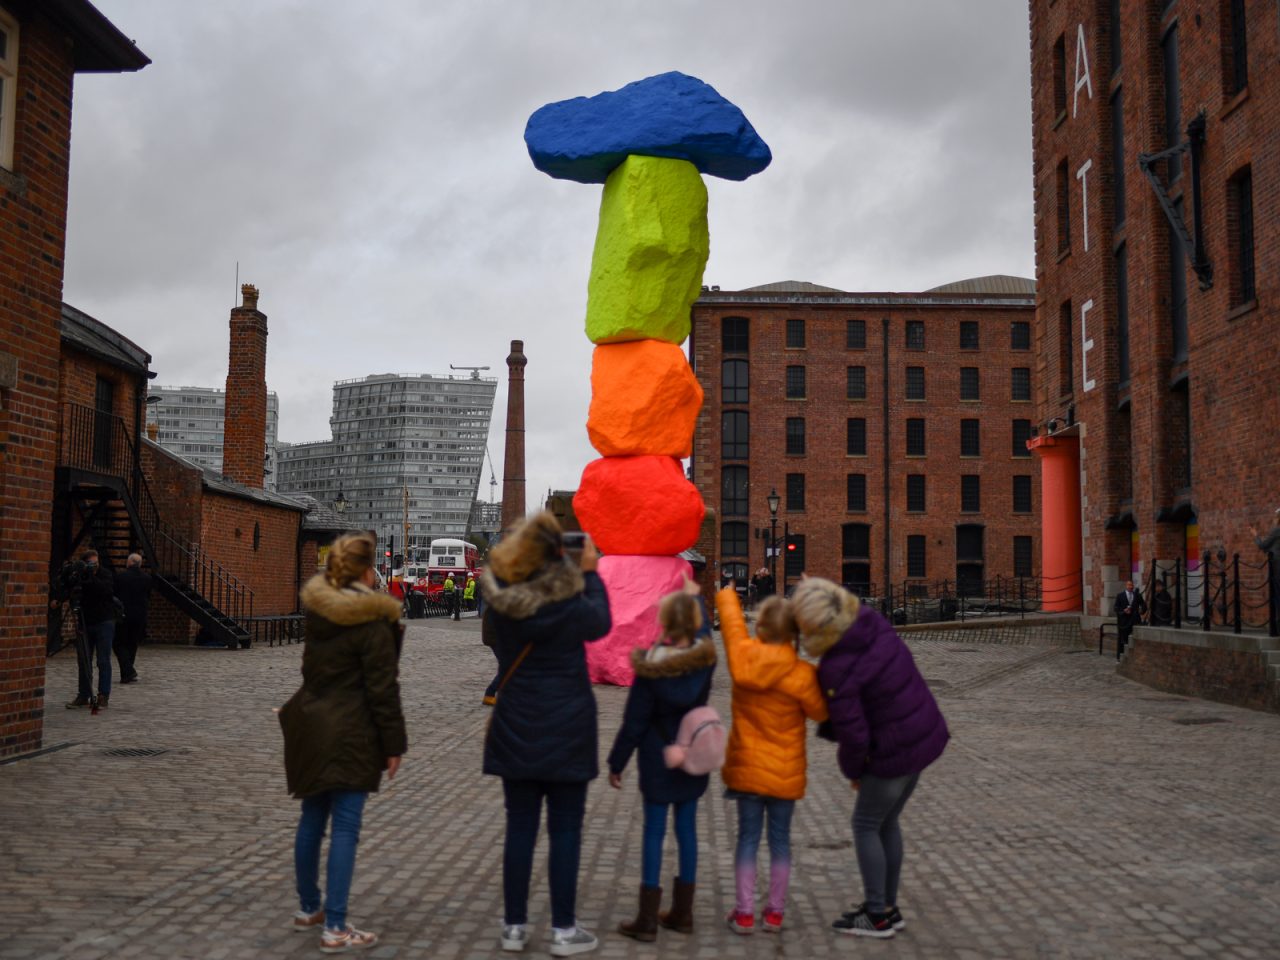 A family of 5 pointing and take a picture of 10-metre high sculpture on Liverpool’s waterfront, the sculpture consists of 5 vertically-stacked rocks painted in bright fluorescent colours